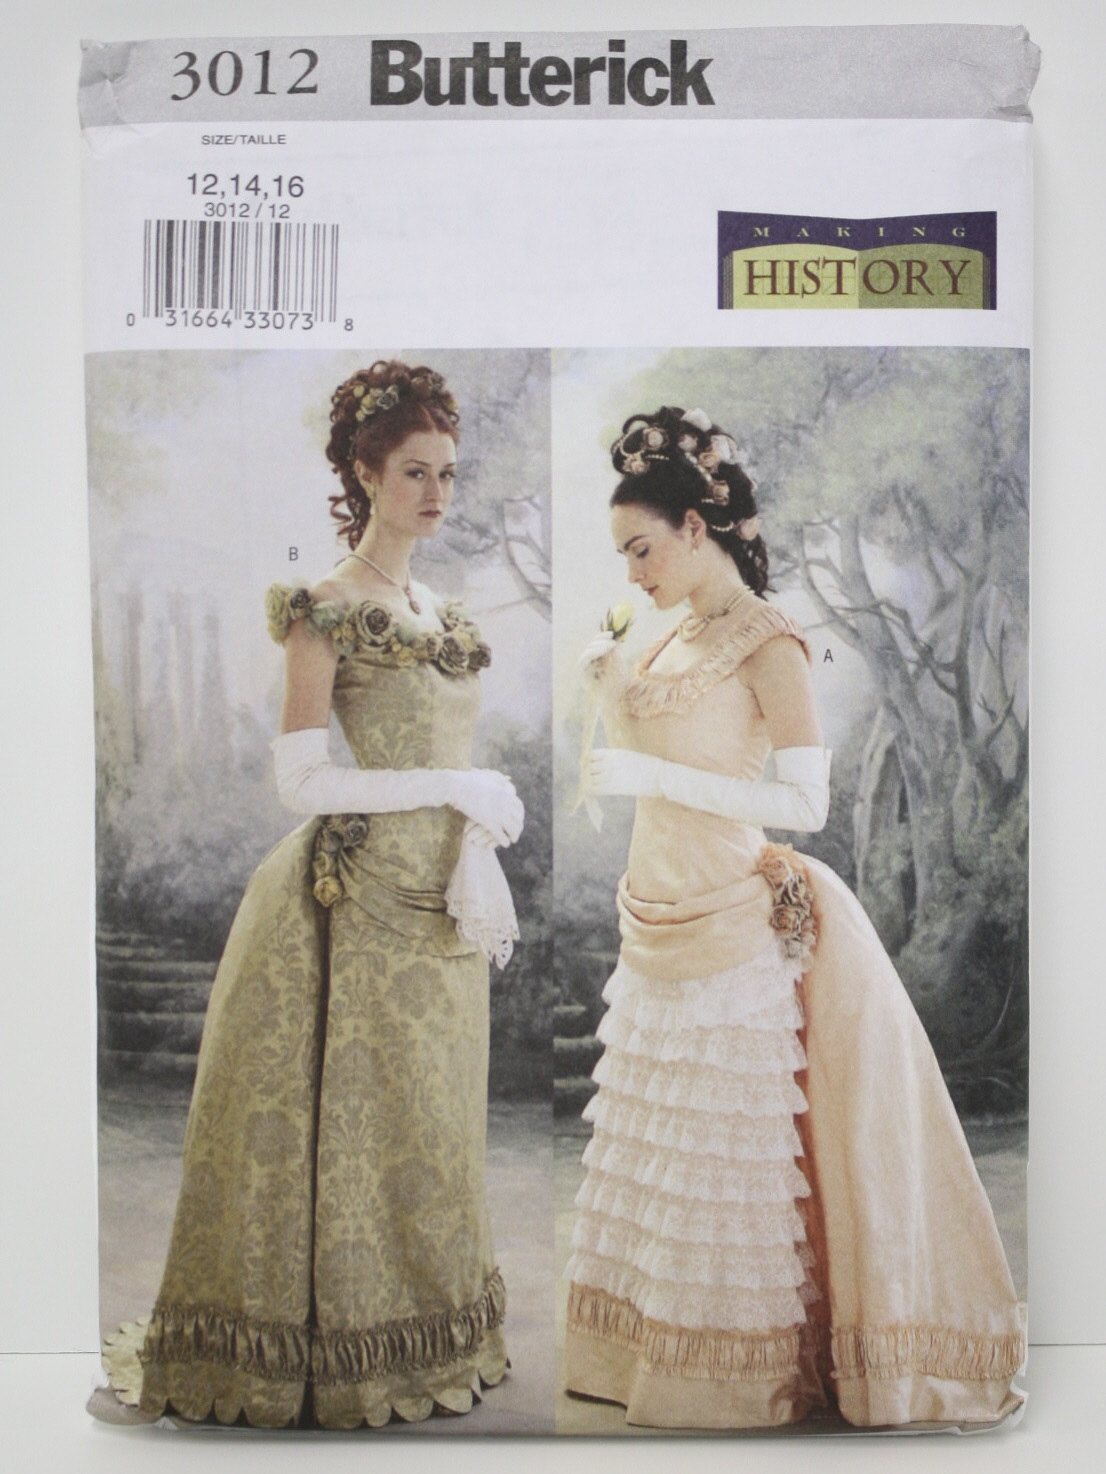 Retro Twenties Sewing Pattern: c.1890s style (made in 2000s) -Butterick ...